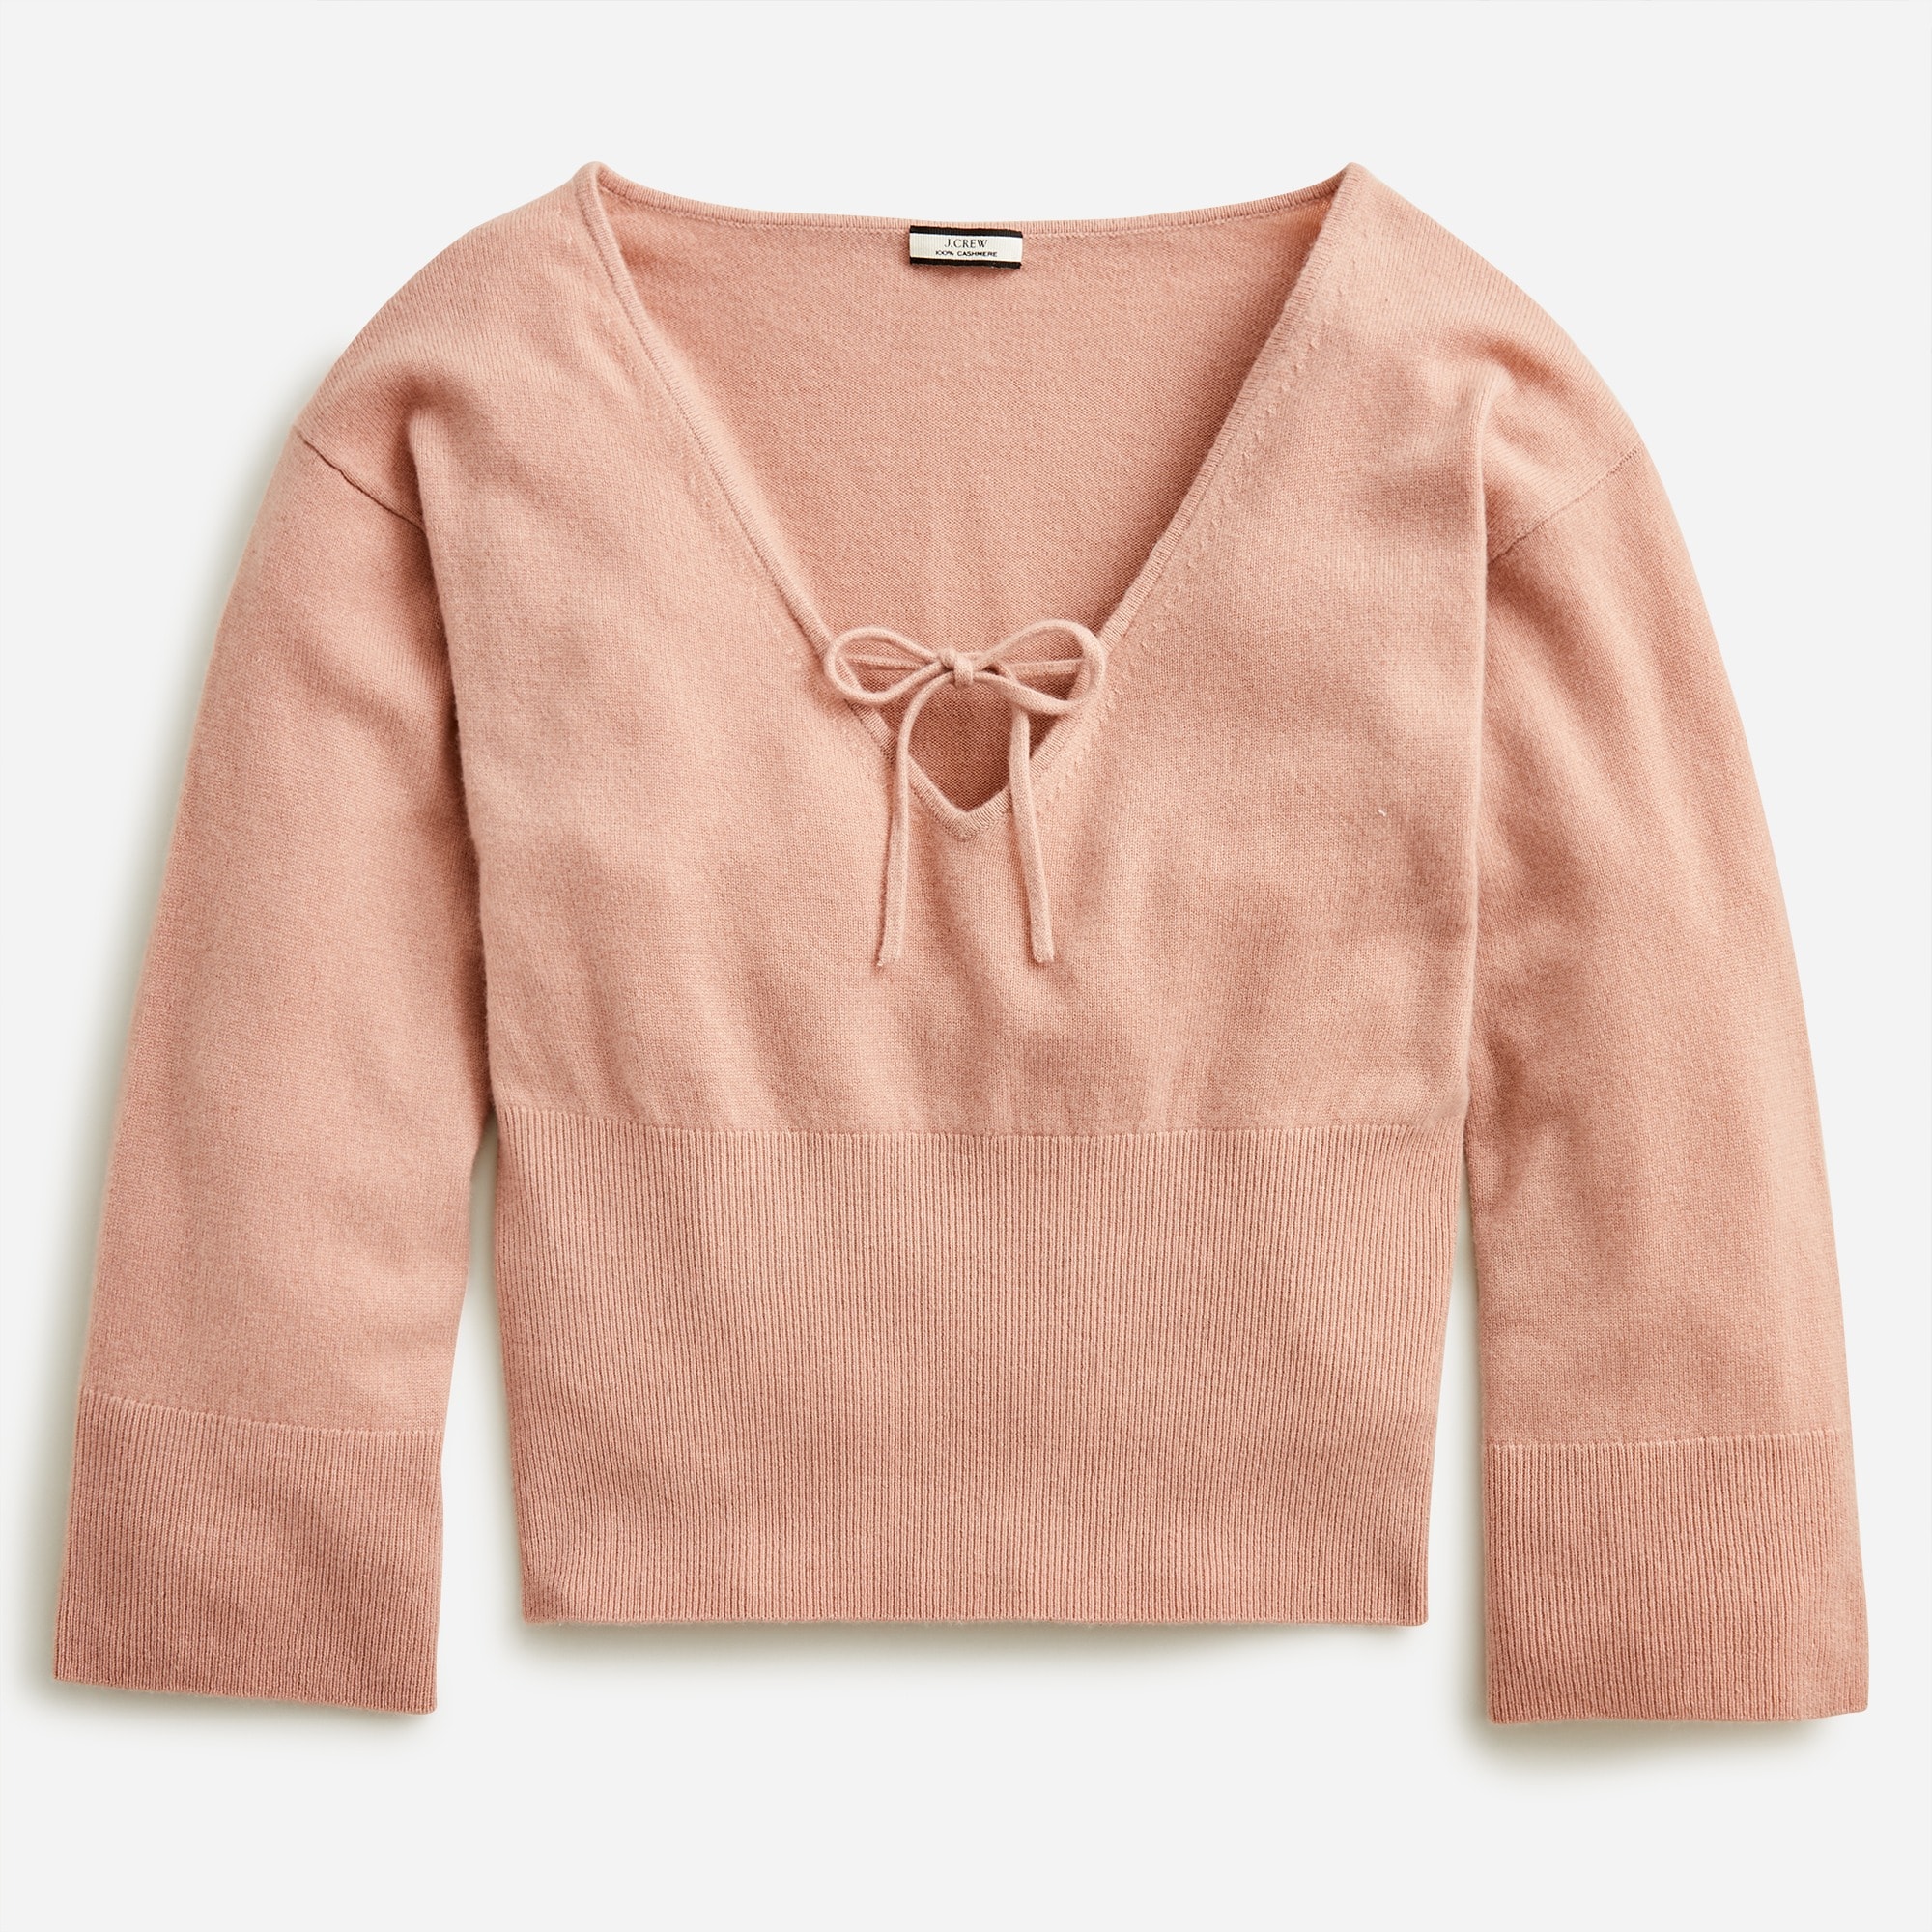 J.Crew: Cashmere Ribbed Crewneck Sweater For Women